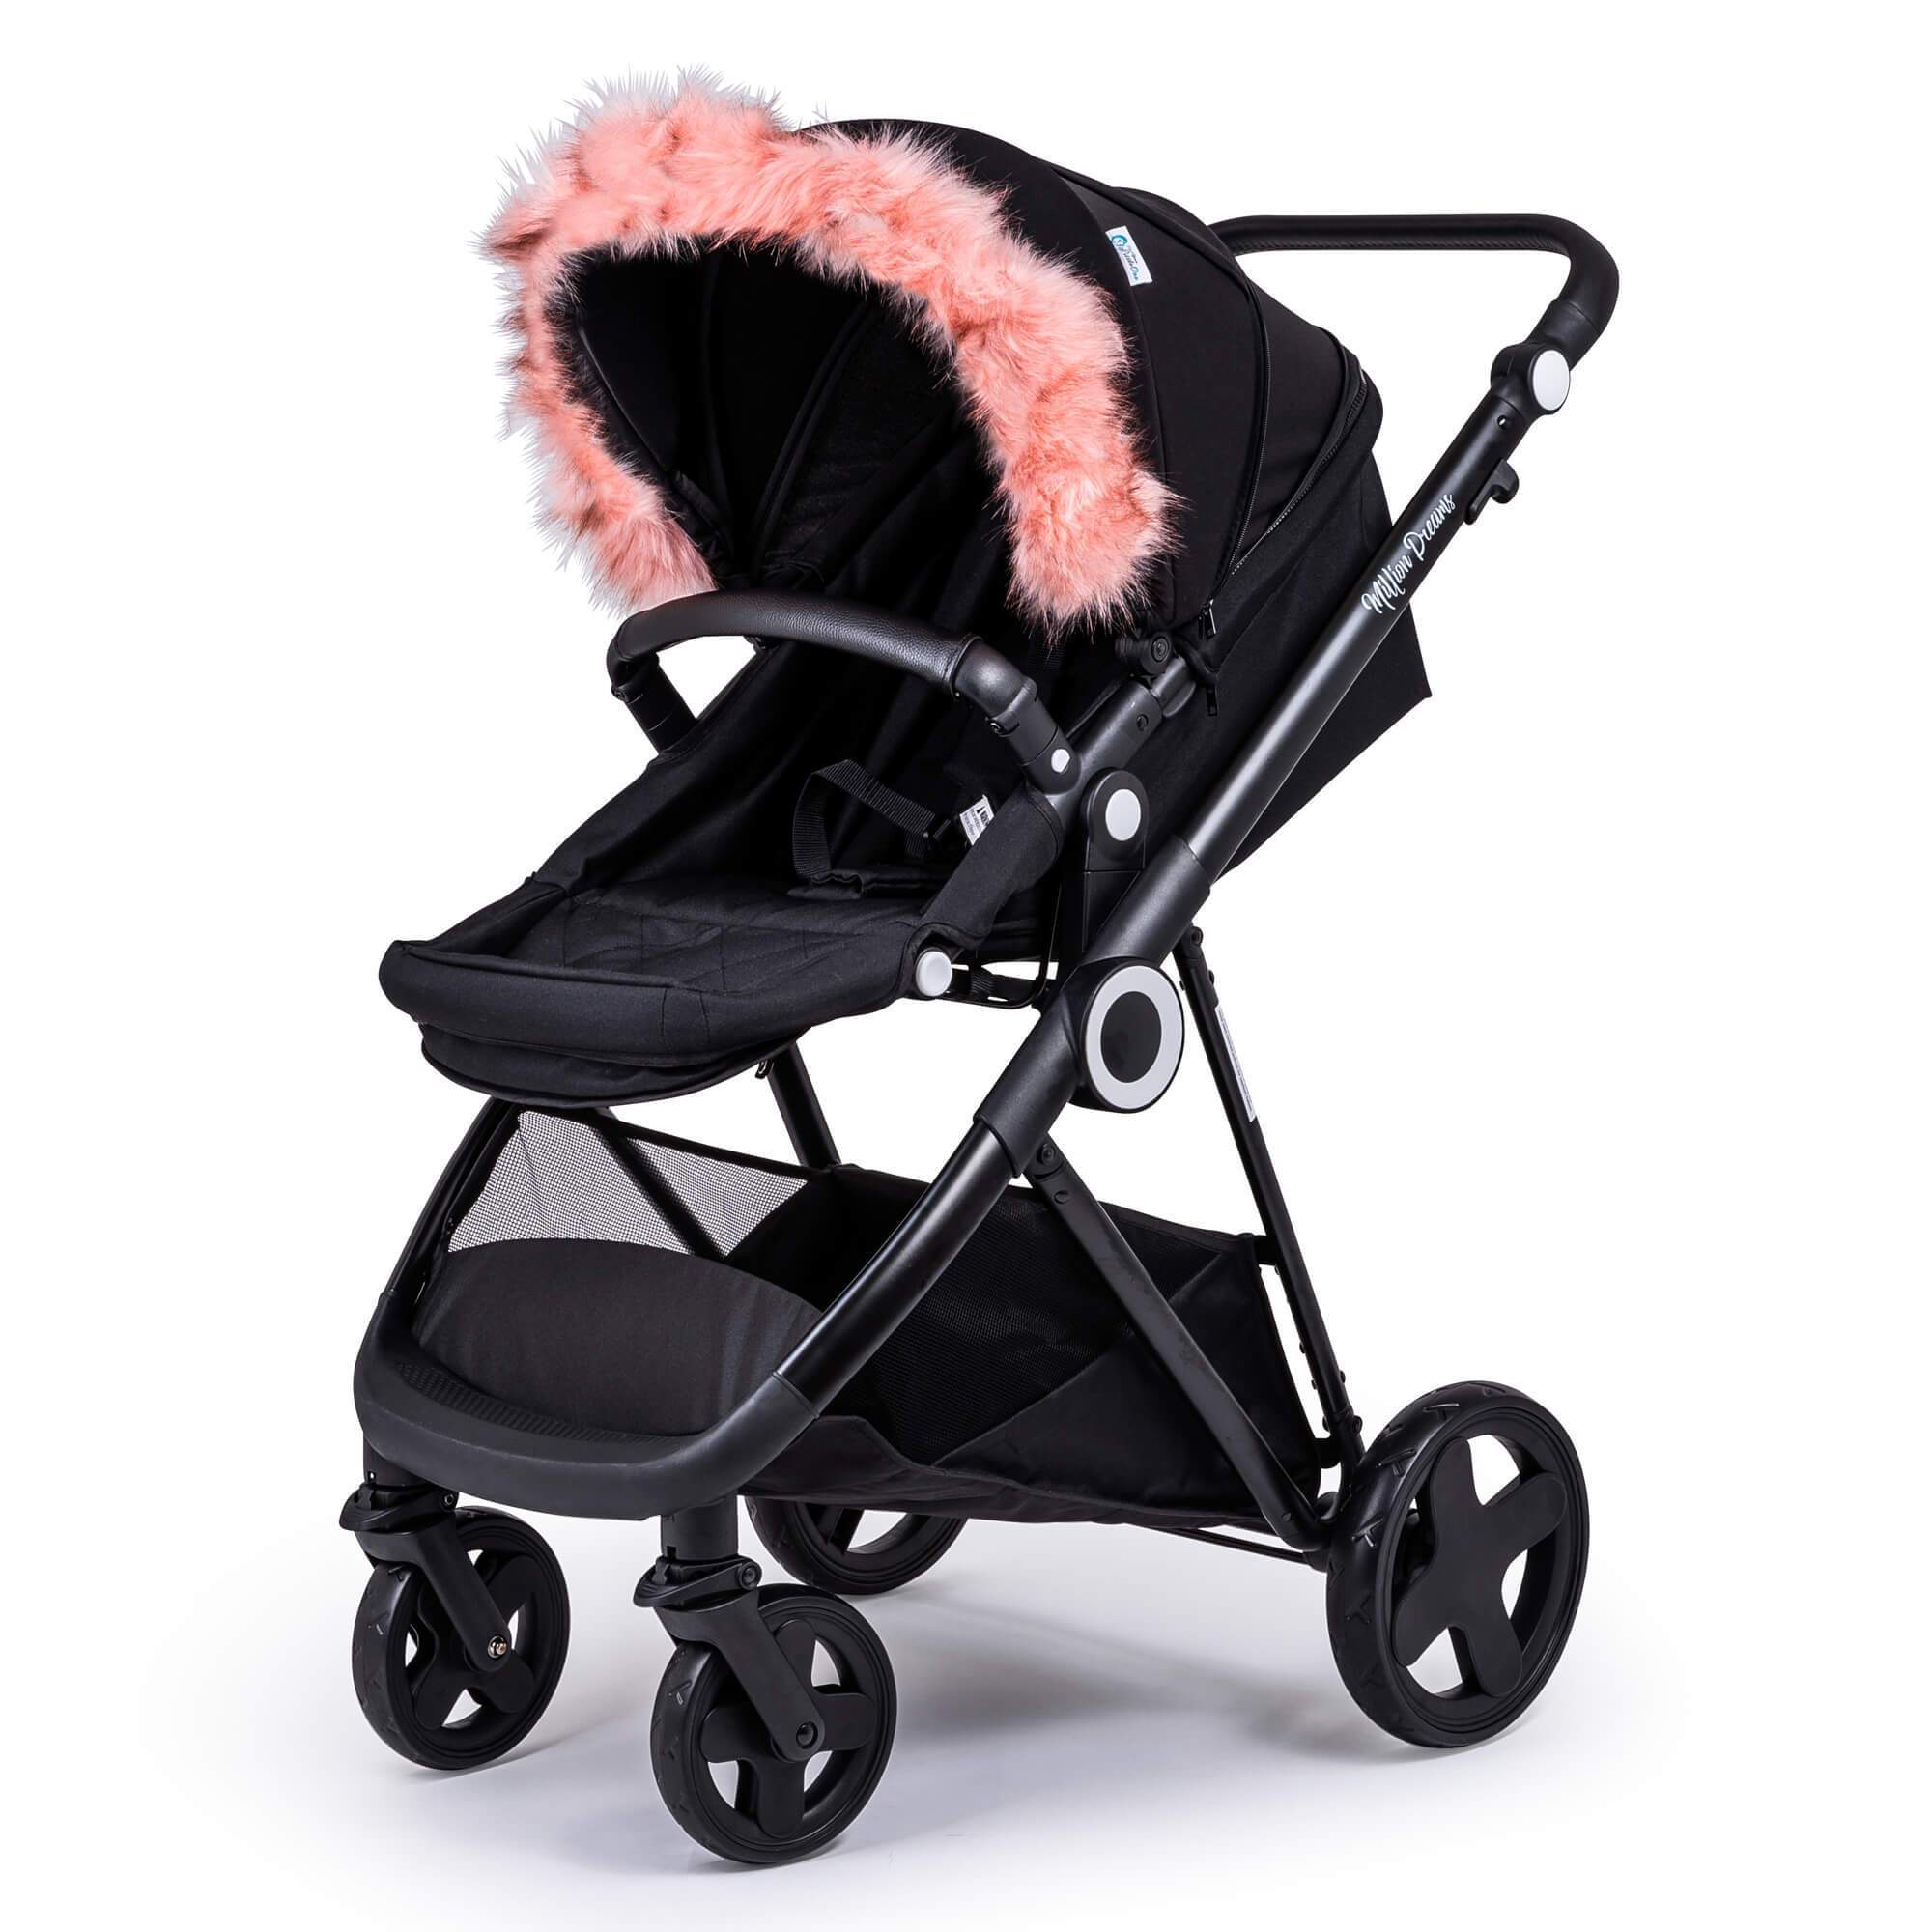 Pram Fur Hood Trim Attachment For Pushchair Compatible with My Child - Pink / Fits All Models | For Your Little One